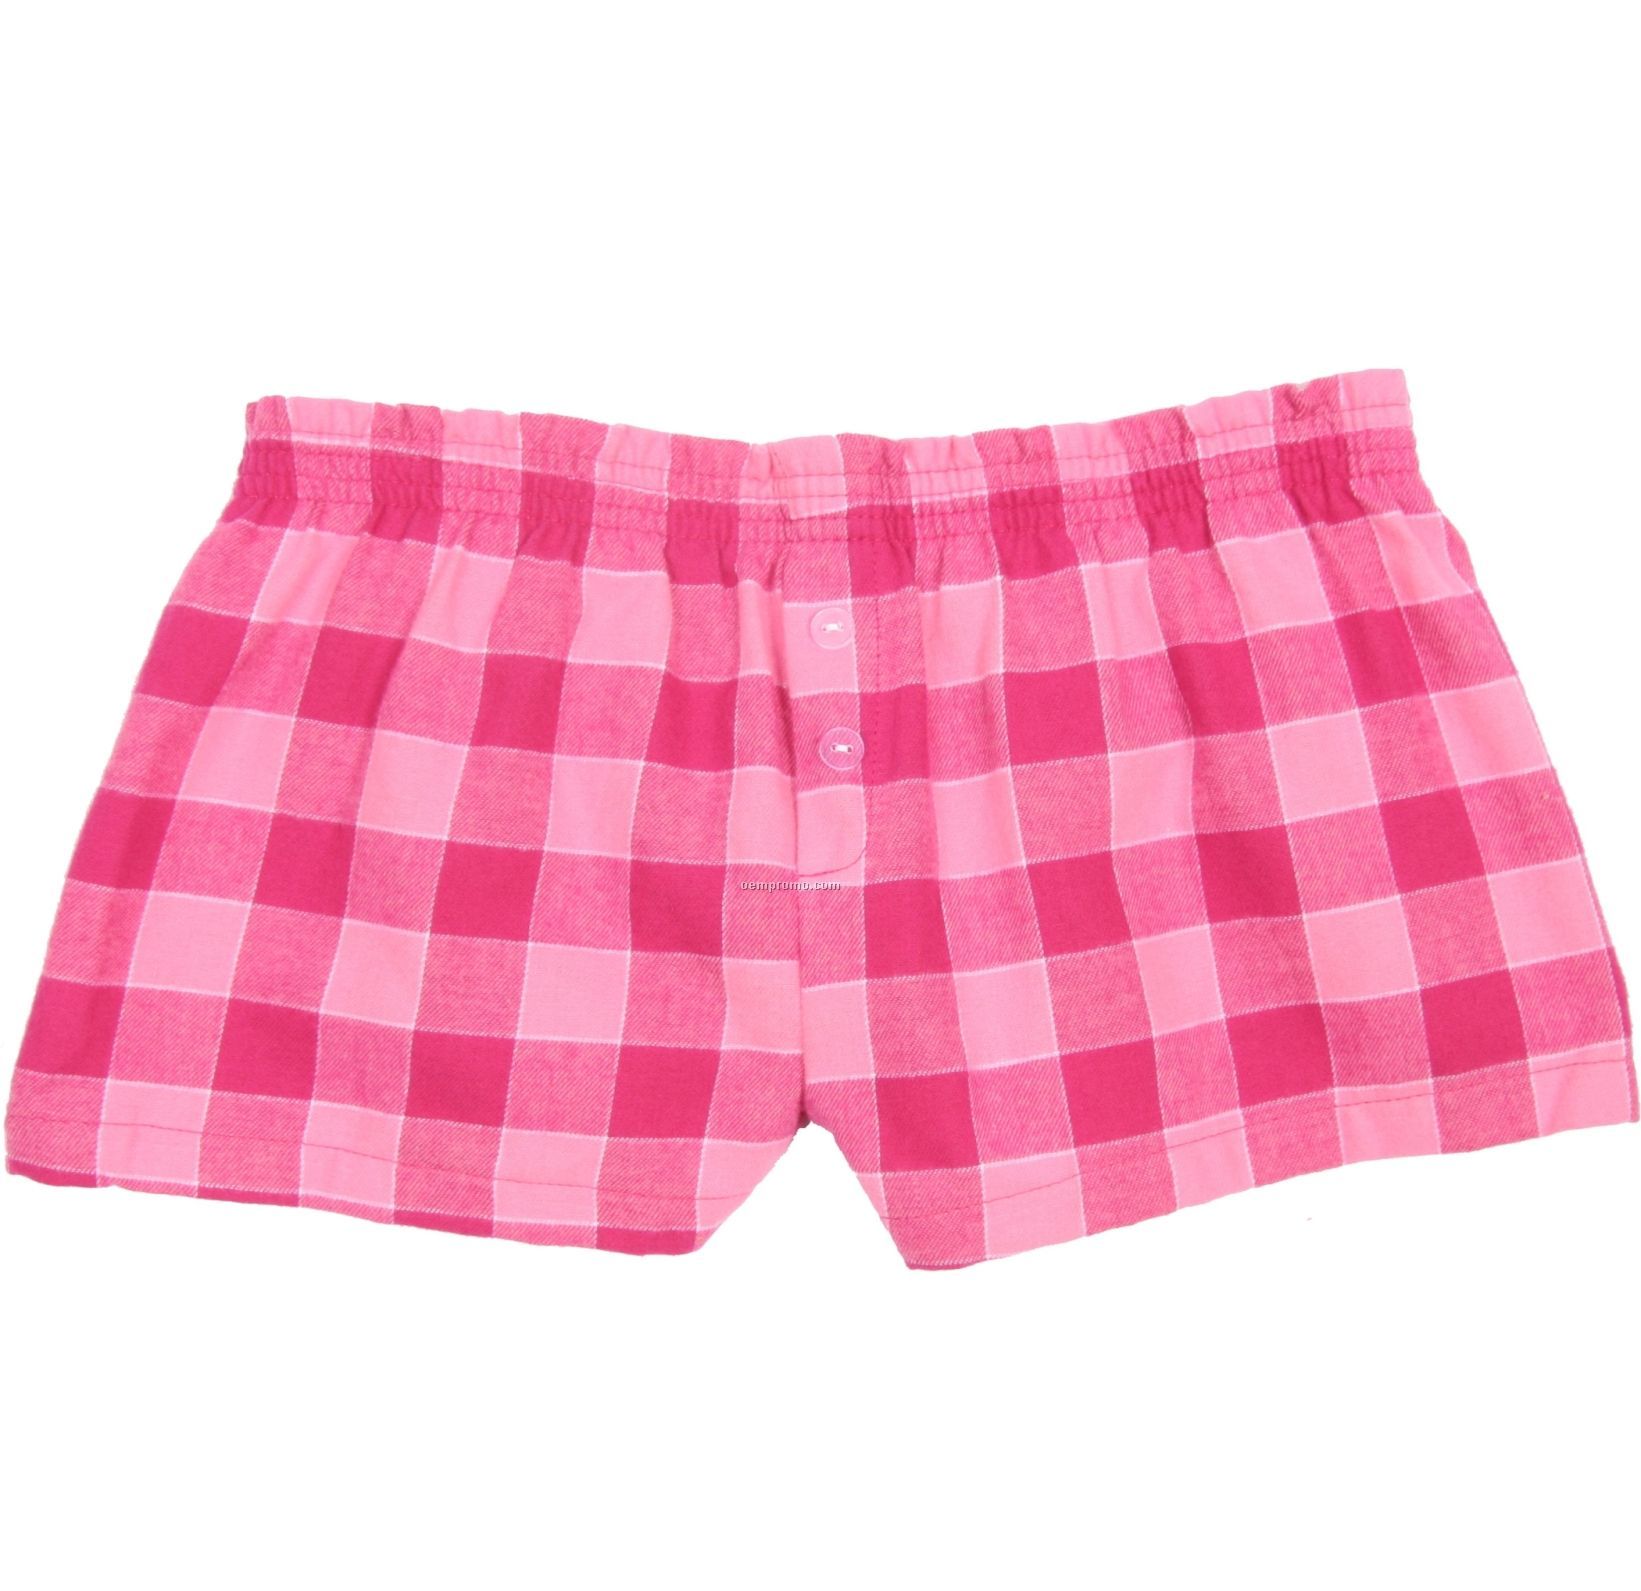 Ladies' Bubblegum Pink Flannel Bitty Boxer Short With False Fly